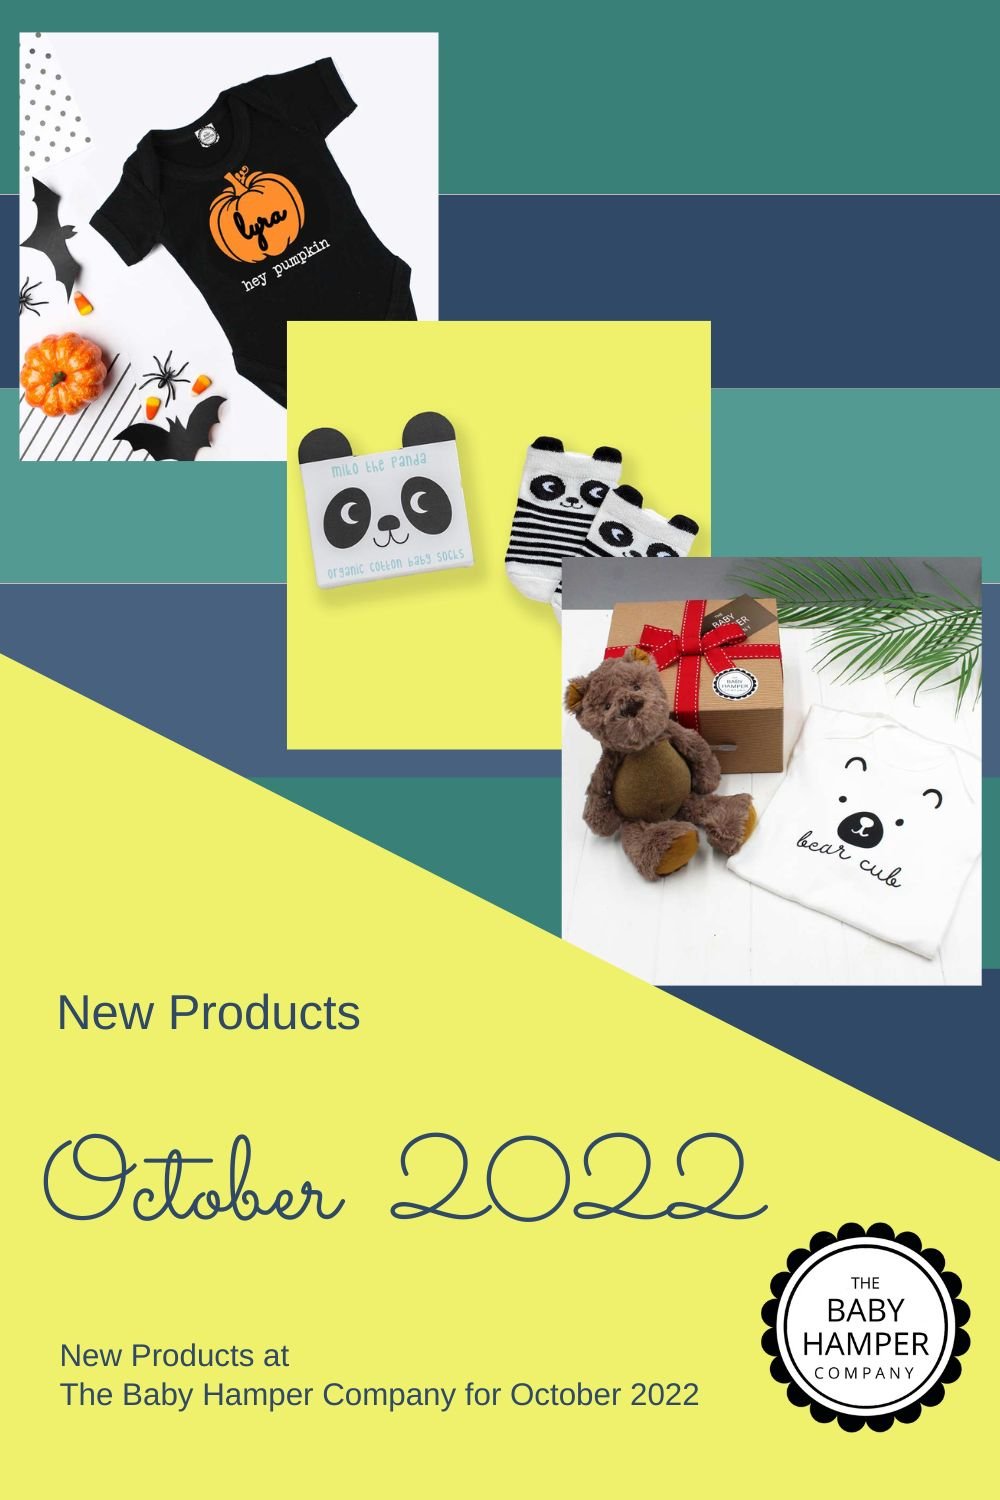 New Products at The Baby Hamper Company for October 2022